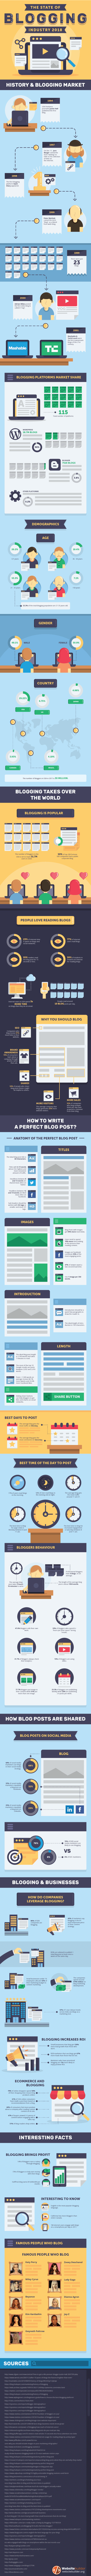 history of blogging infographic